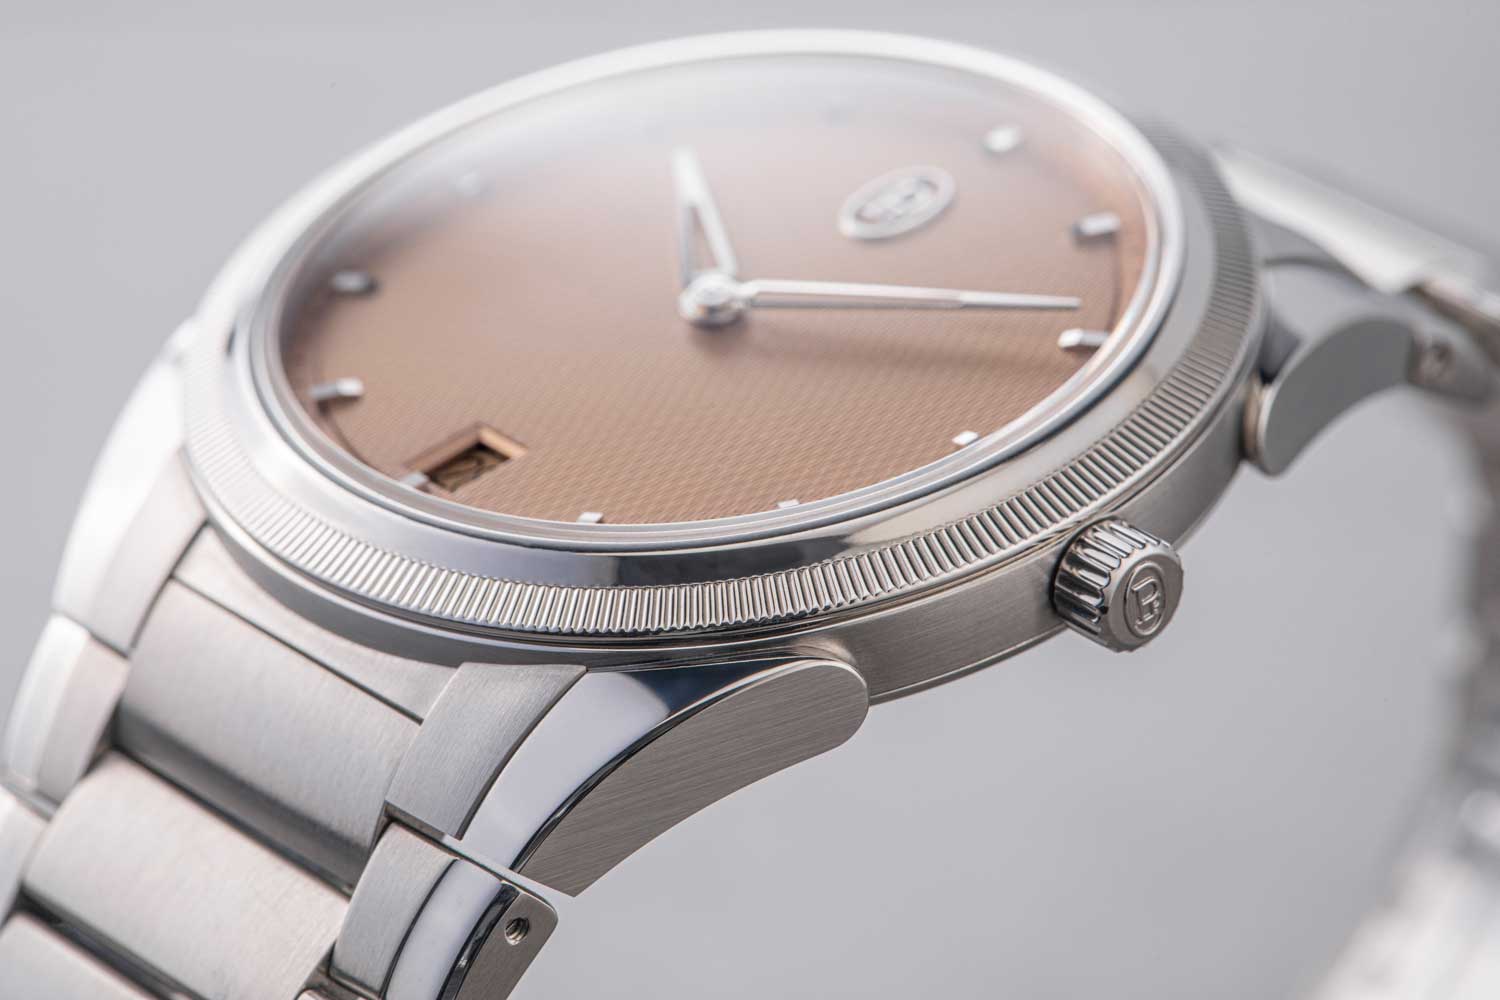 From the micro-fluting on the platinum bezel to the contrast between the tapering polished sections that flow into the sublimely brushed bracelet, every detail of the Tonda PF is carefully thought out and beautifully executed